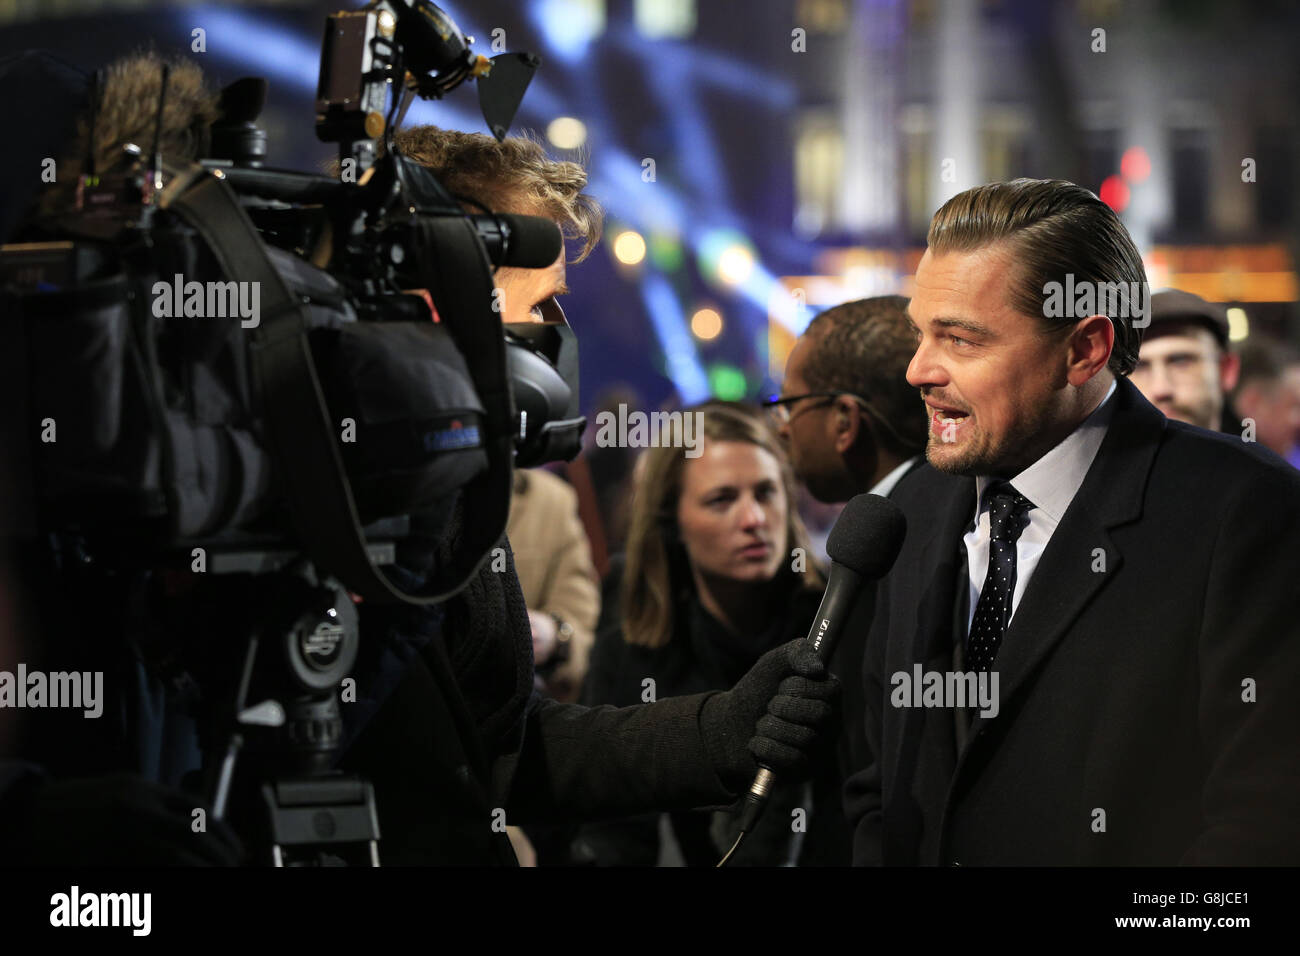 Leonardo DiCaprio gives a television interview as he attends The Revenant premiere, held at Empire Leicester Square, London. PRESS ASSOCIATION Photo. Picture date: Thursday January 14, 2016. See PA story SHOWBIZ Revenant. Photo credit should read: Jonathan Brady/PA Wire Stock Photo